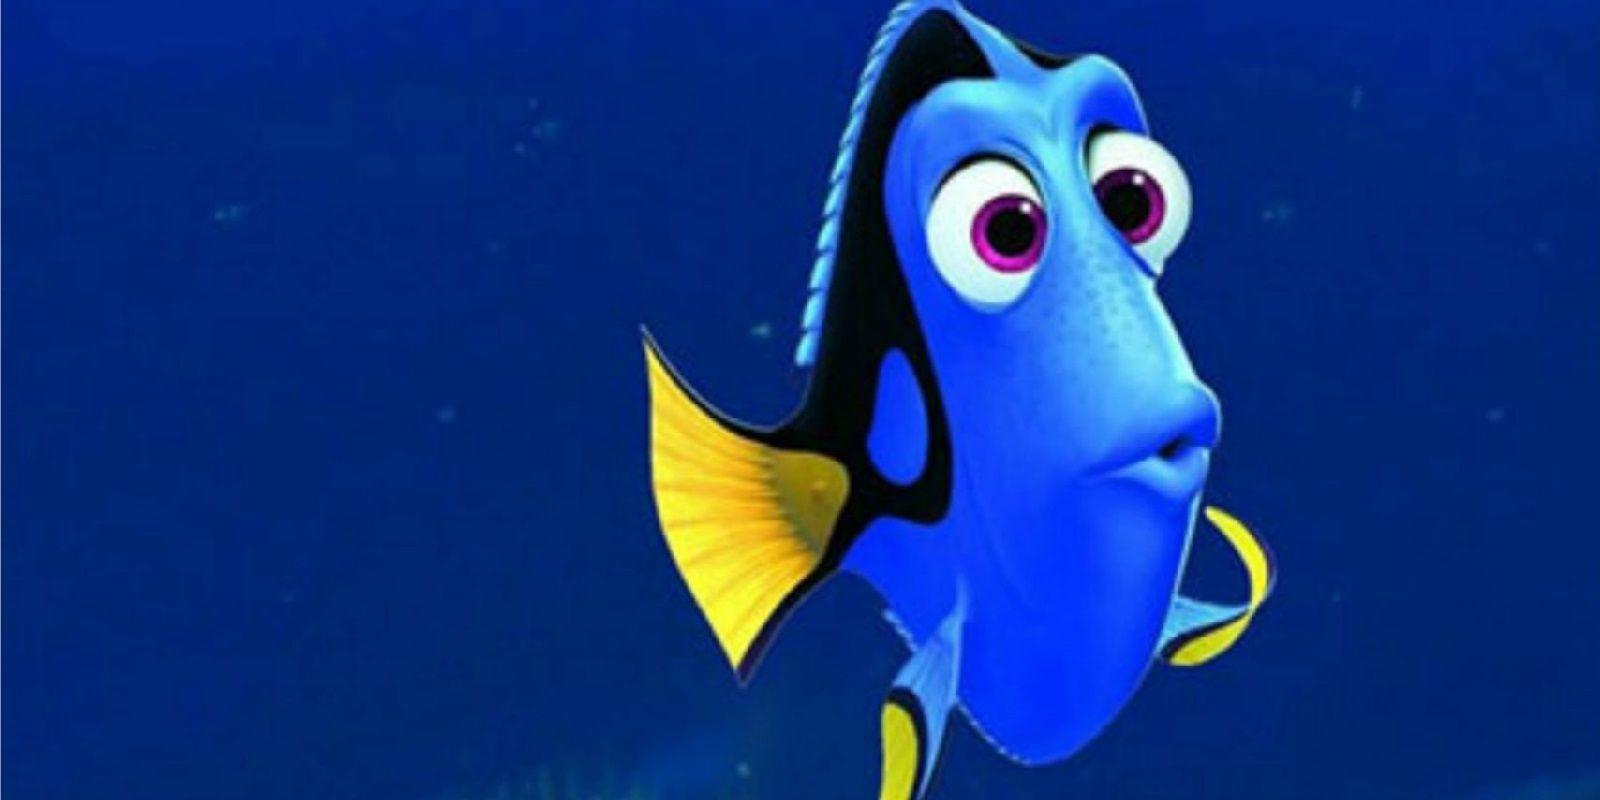 Dory thinking about things in FInding Nemo